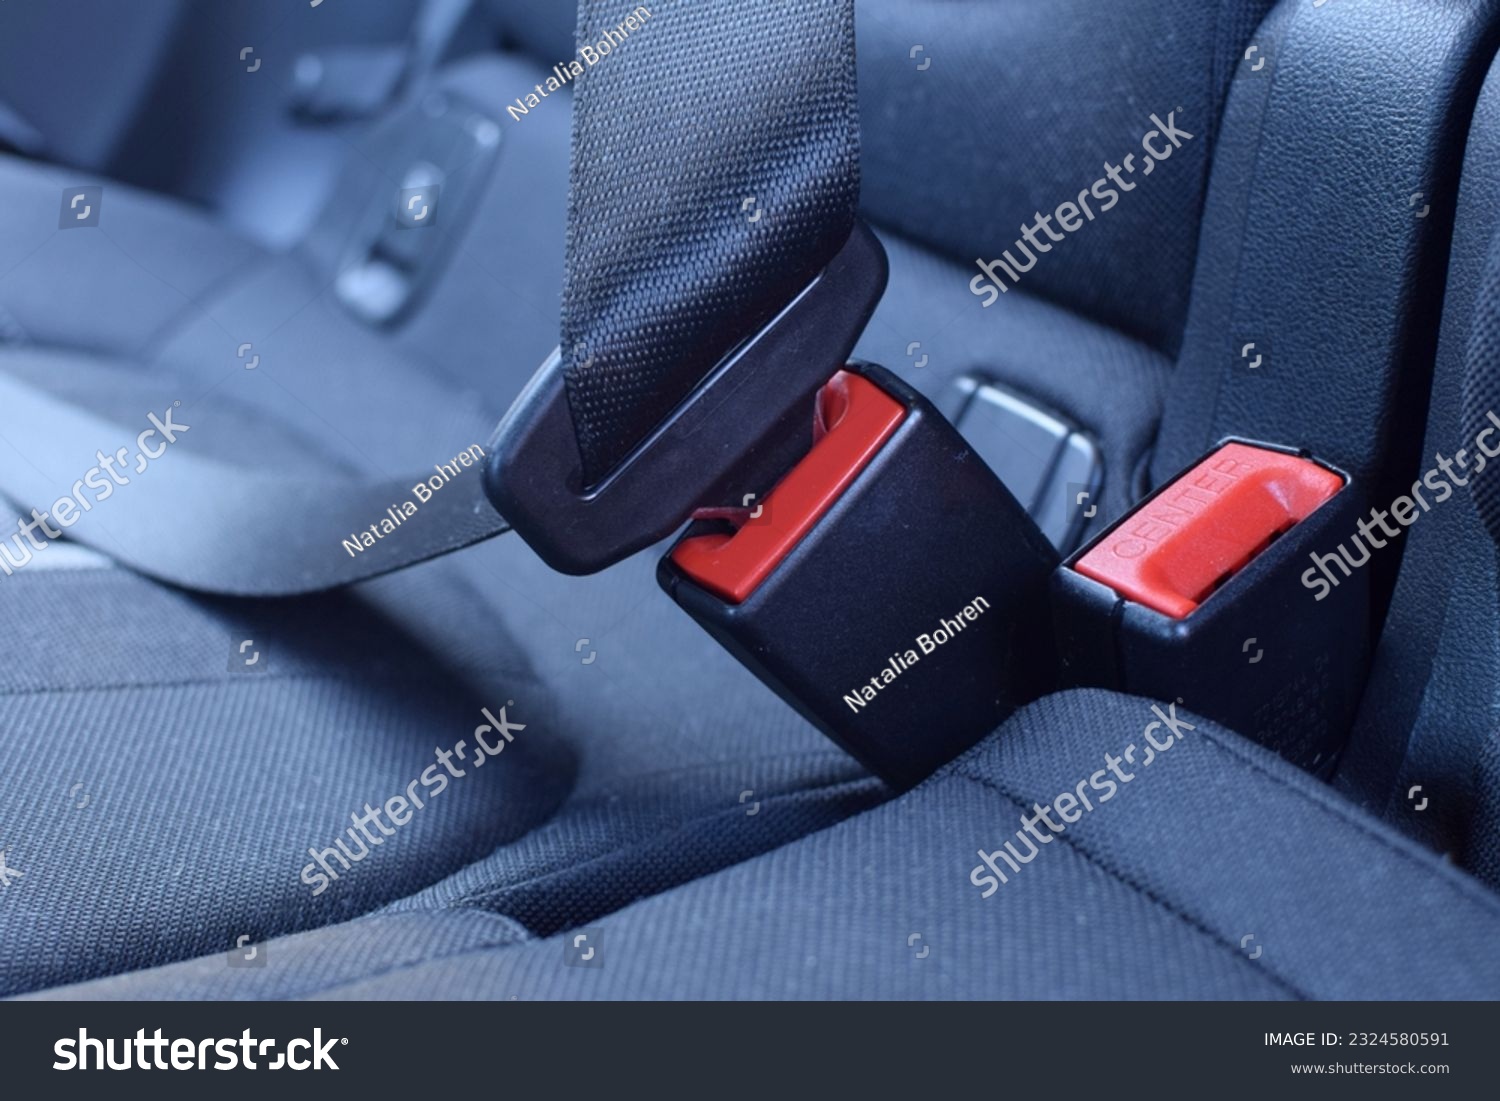 Seat belt in the back seat of the car. #2324580591